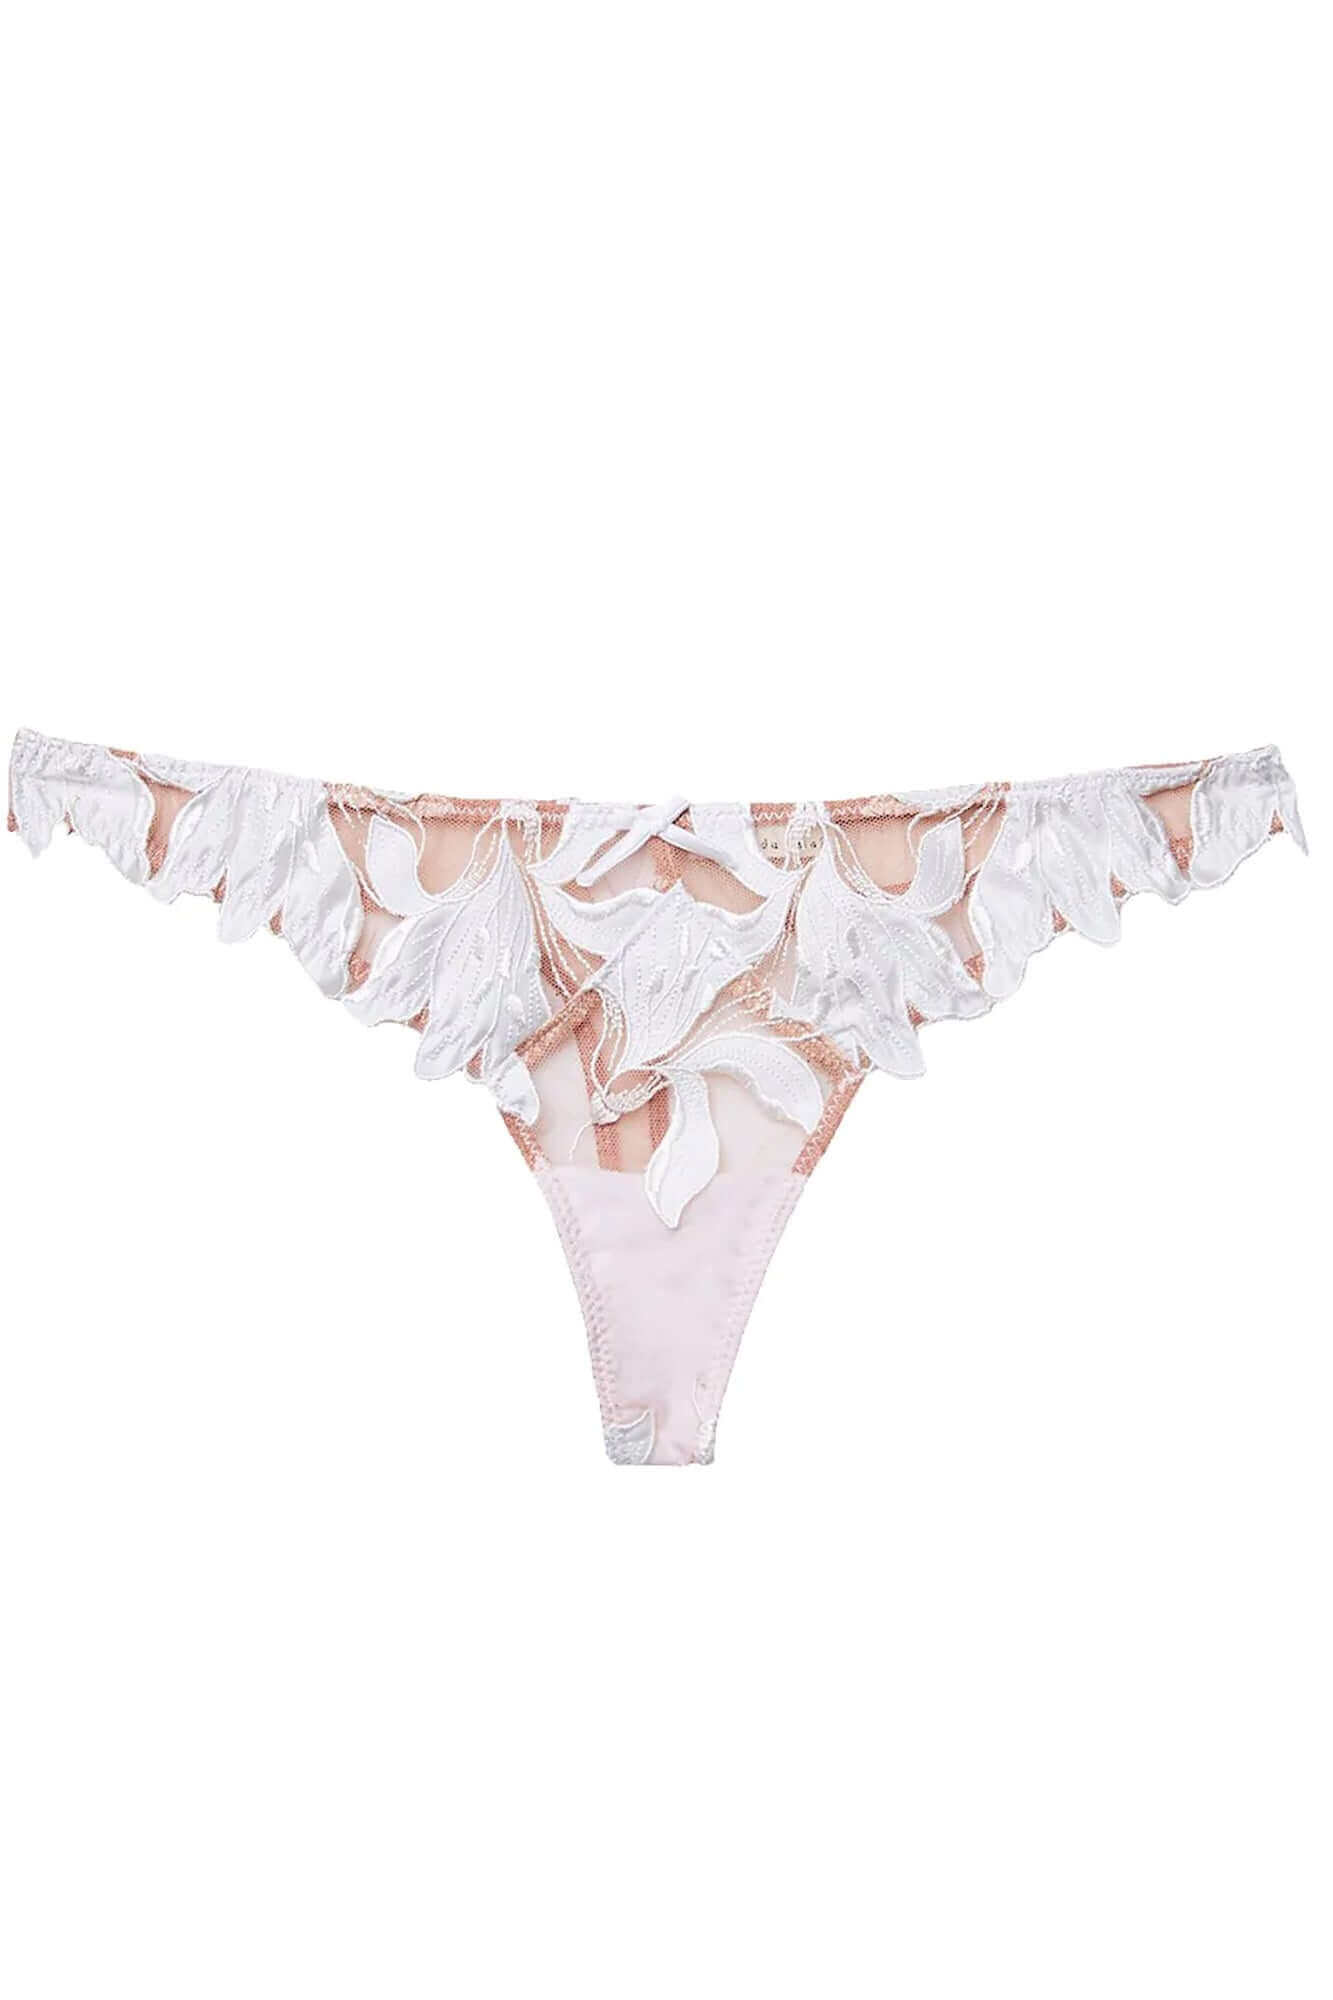 Lily Embroidered Hipster Thong